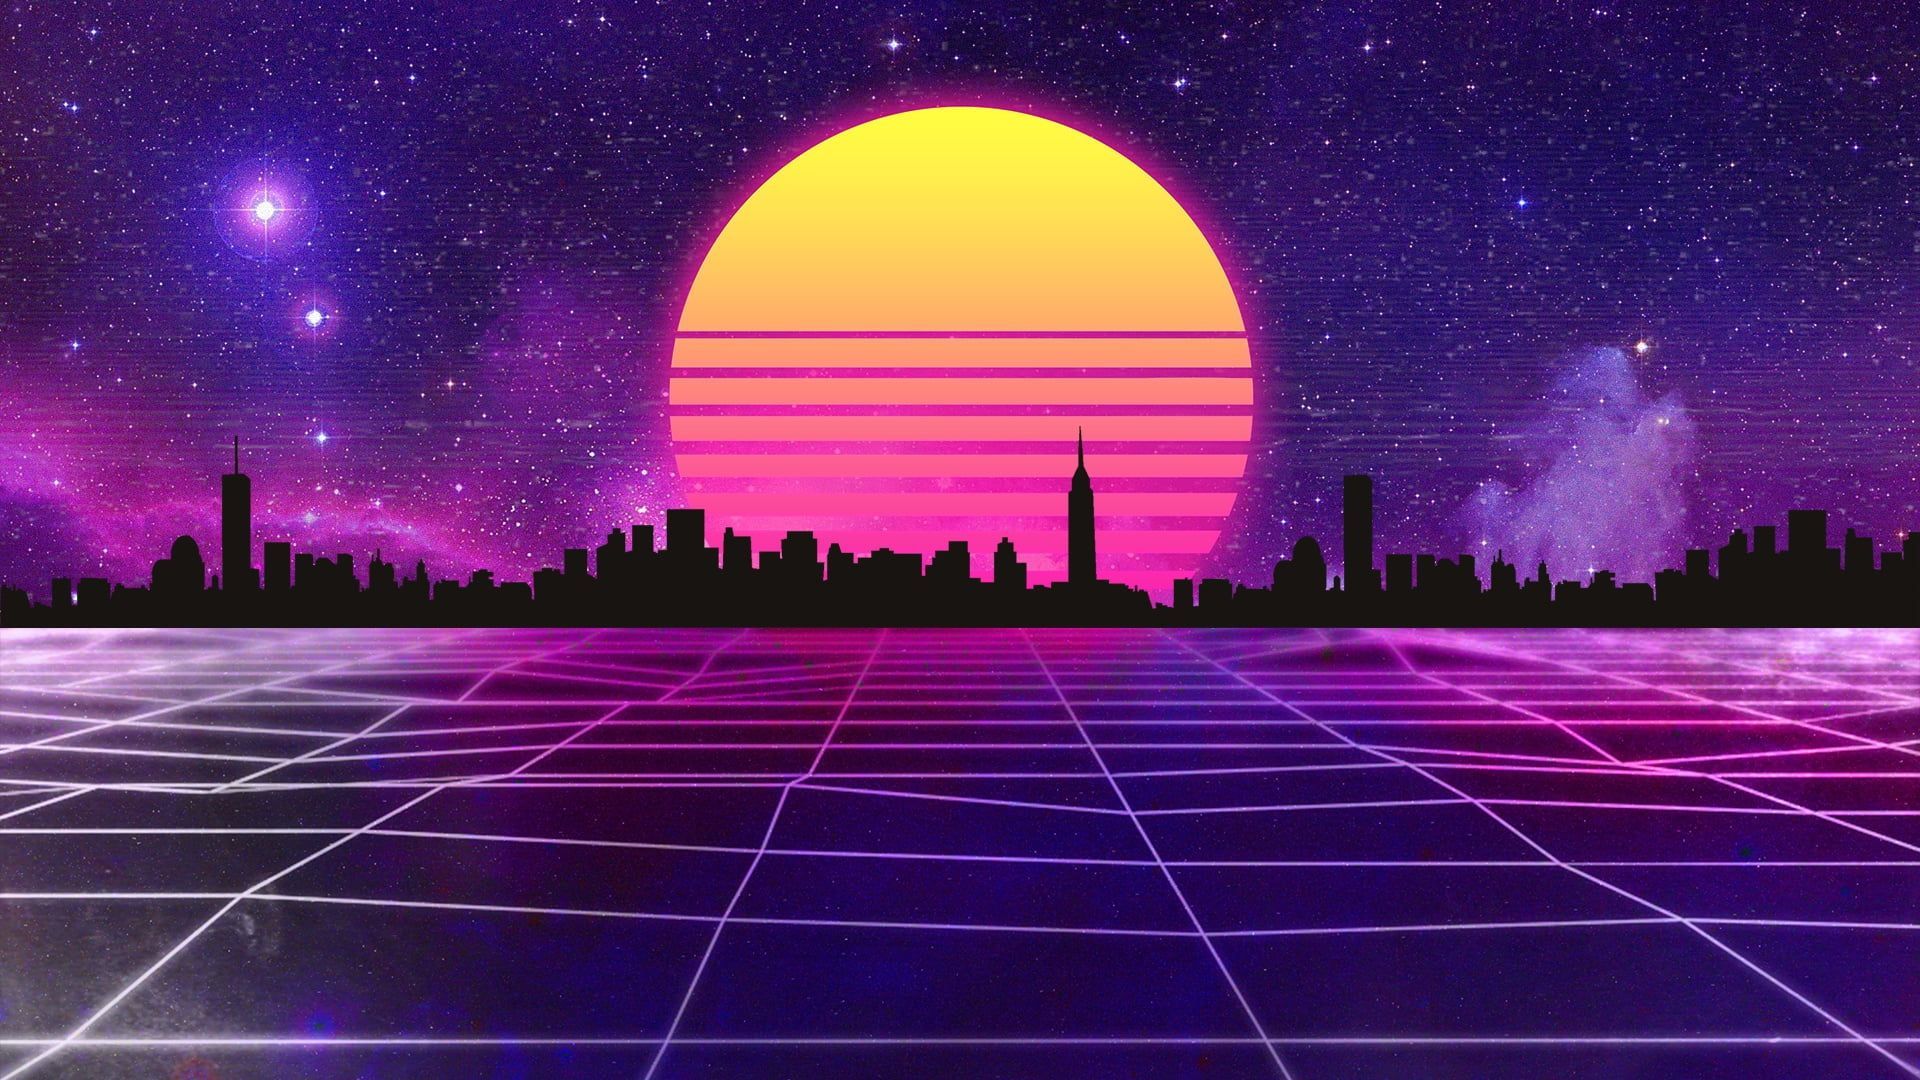 The sun #Music The city #Stars #Space #Background s #Neon 's #Synth # Retrowave #Synthwave New Retro Wave #Futuresynt. Synthwave, Retro waves, Neon wallpaper